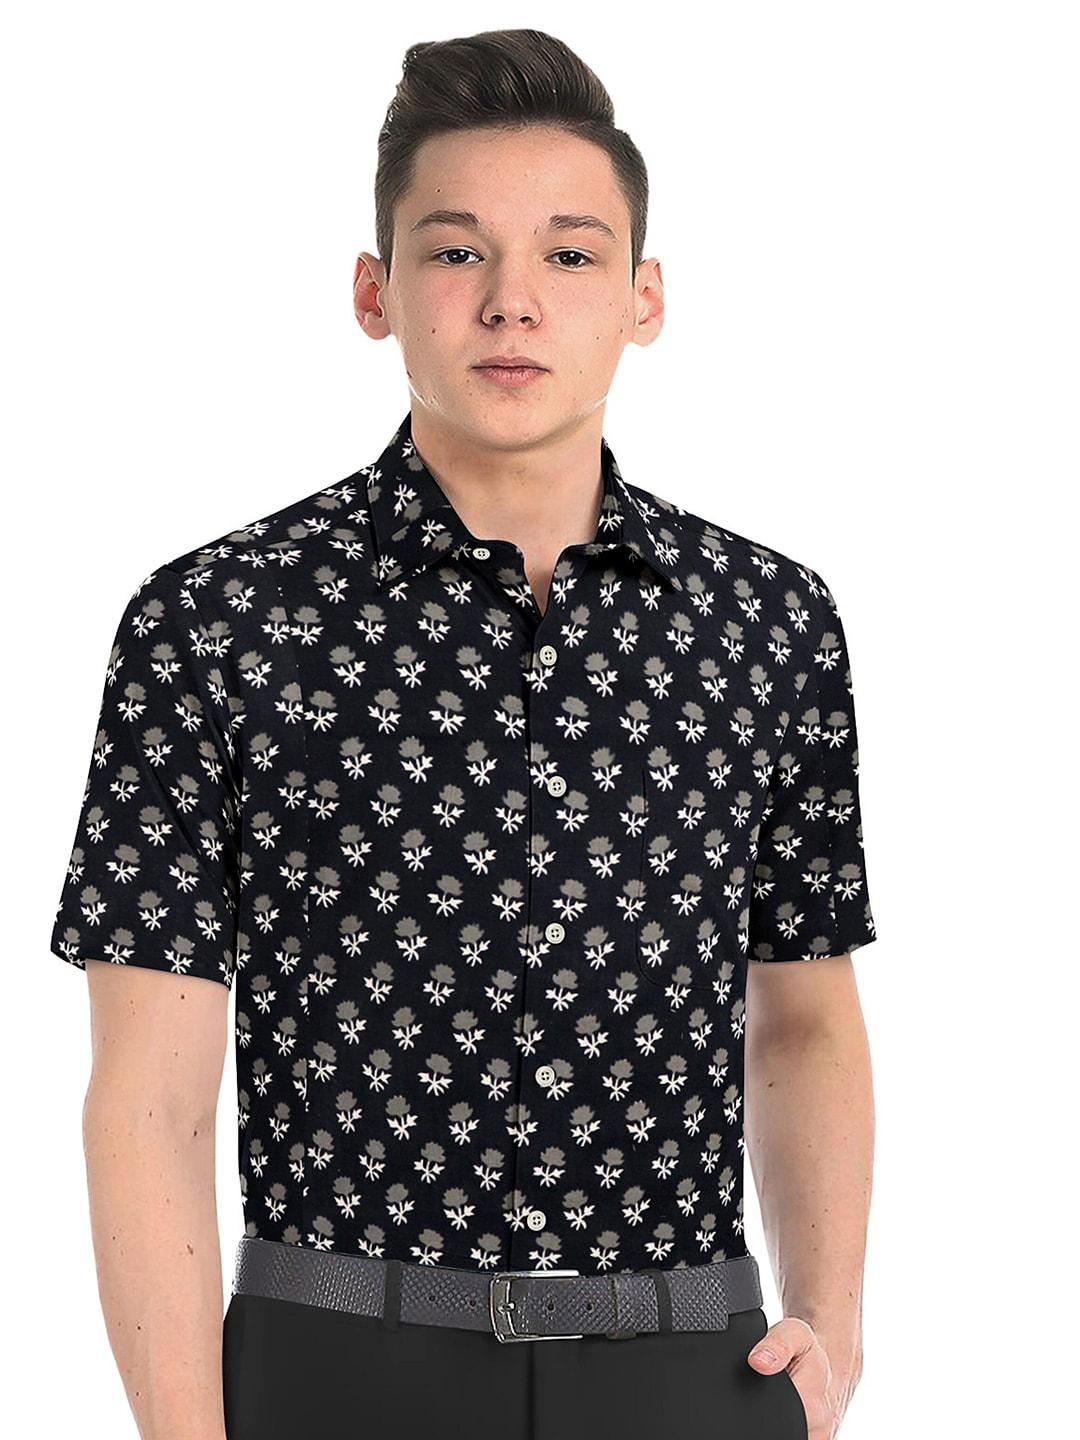 misbis relaxed slim fit opaque printed casual cotton shirt